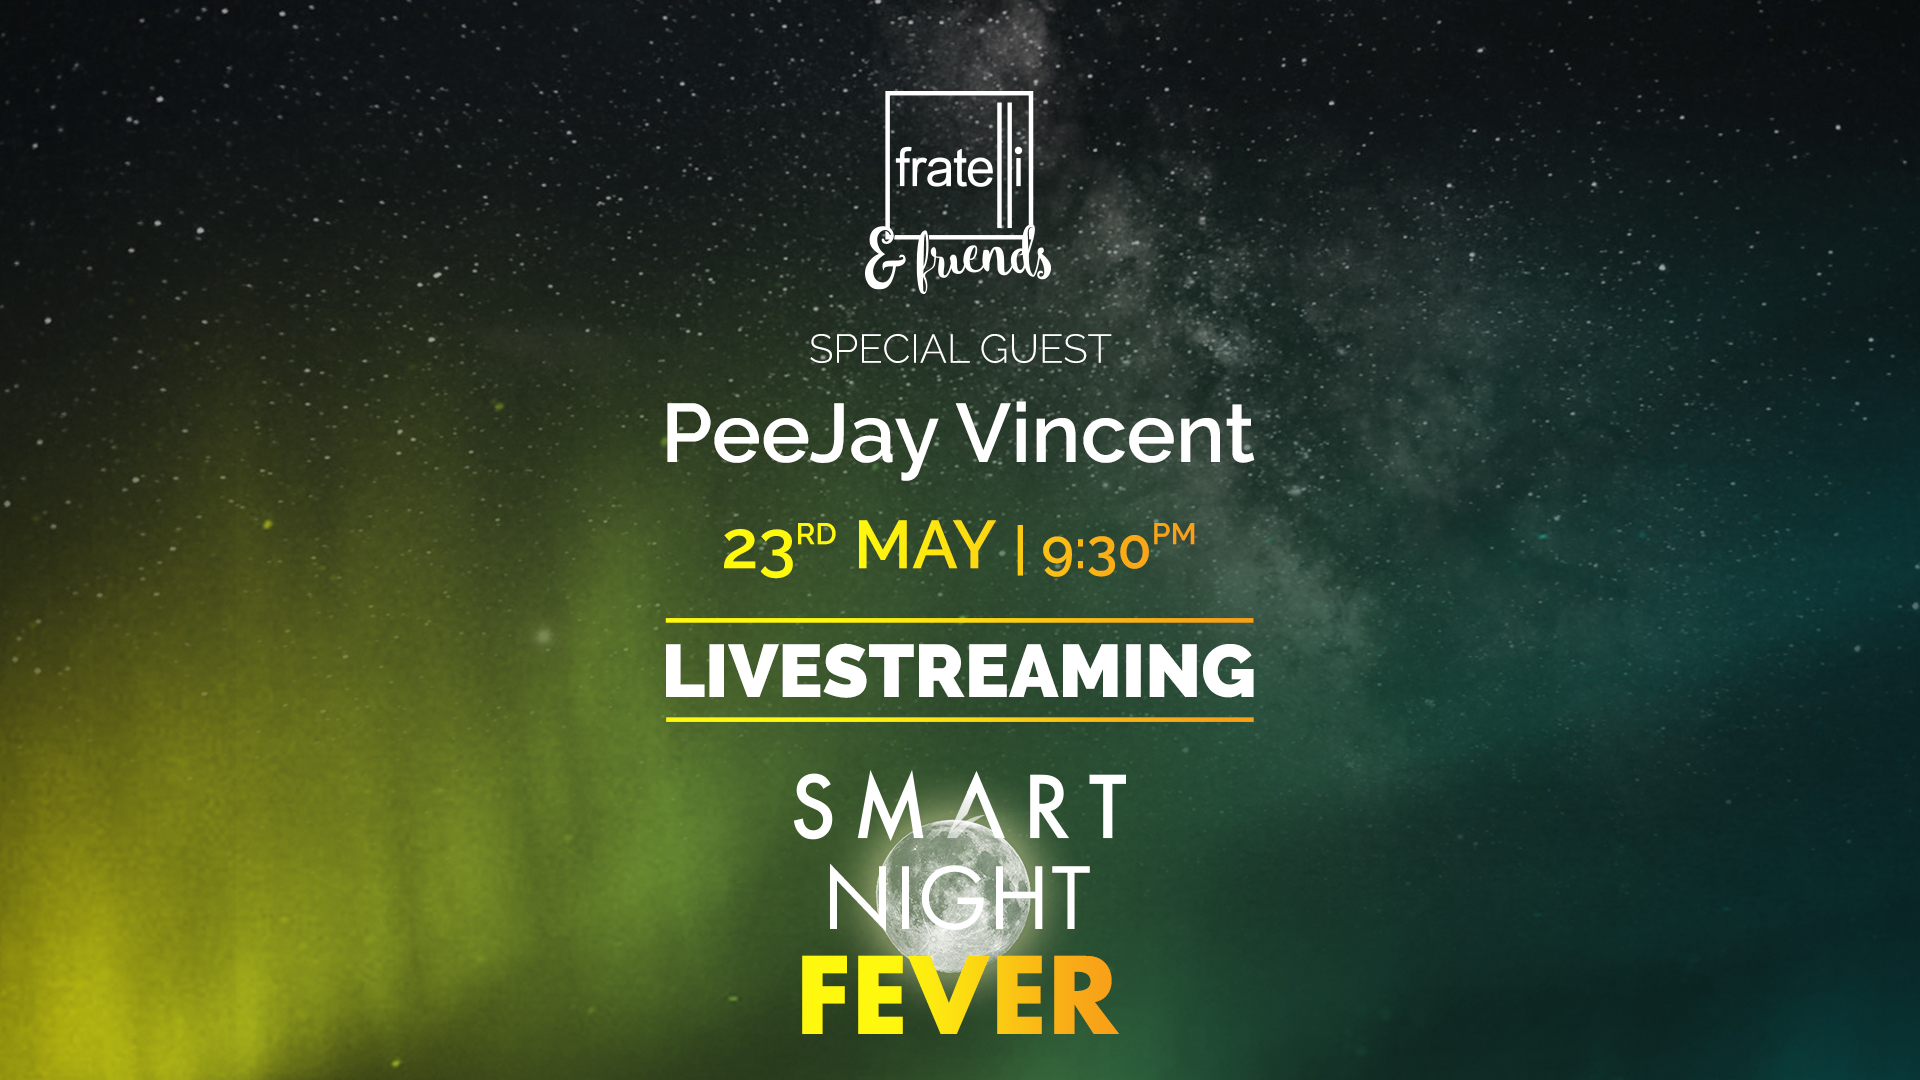 SMART NIGHT FEVER – Party cu Fratelli Social Events. Special Guest PeeJay Vincent